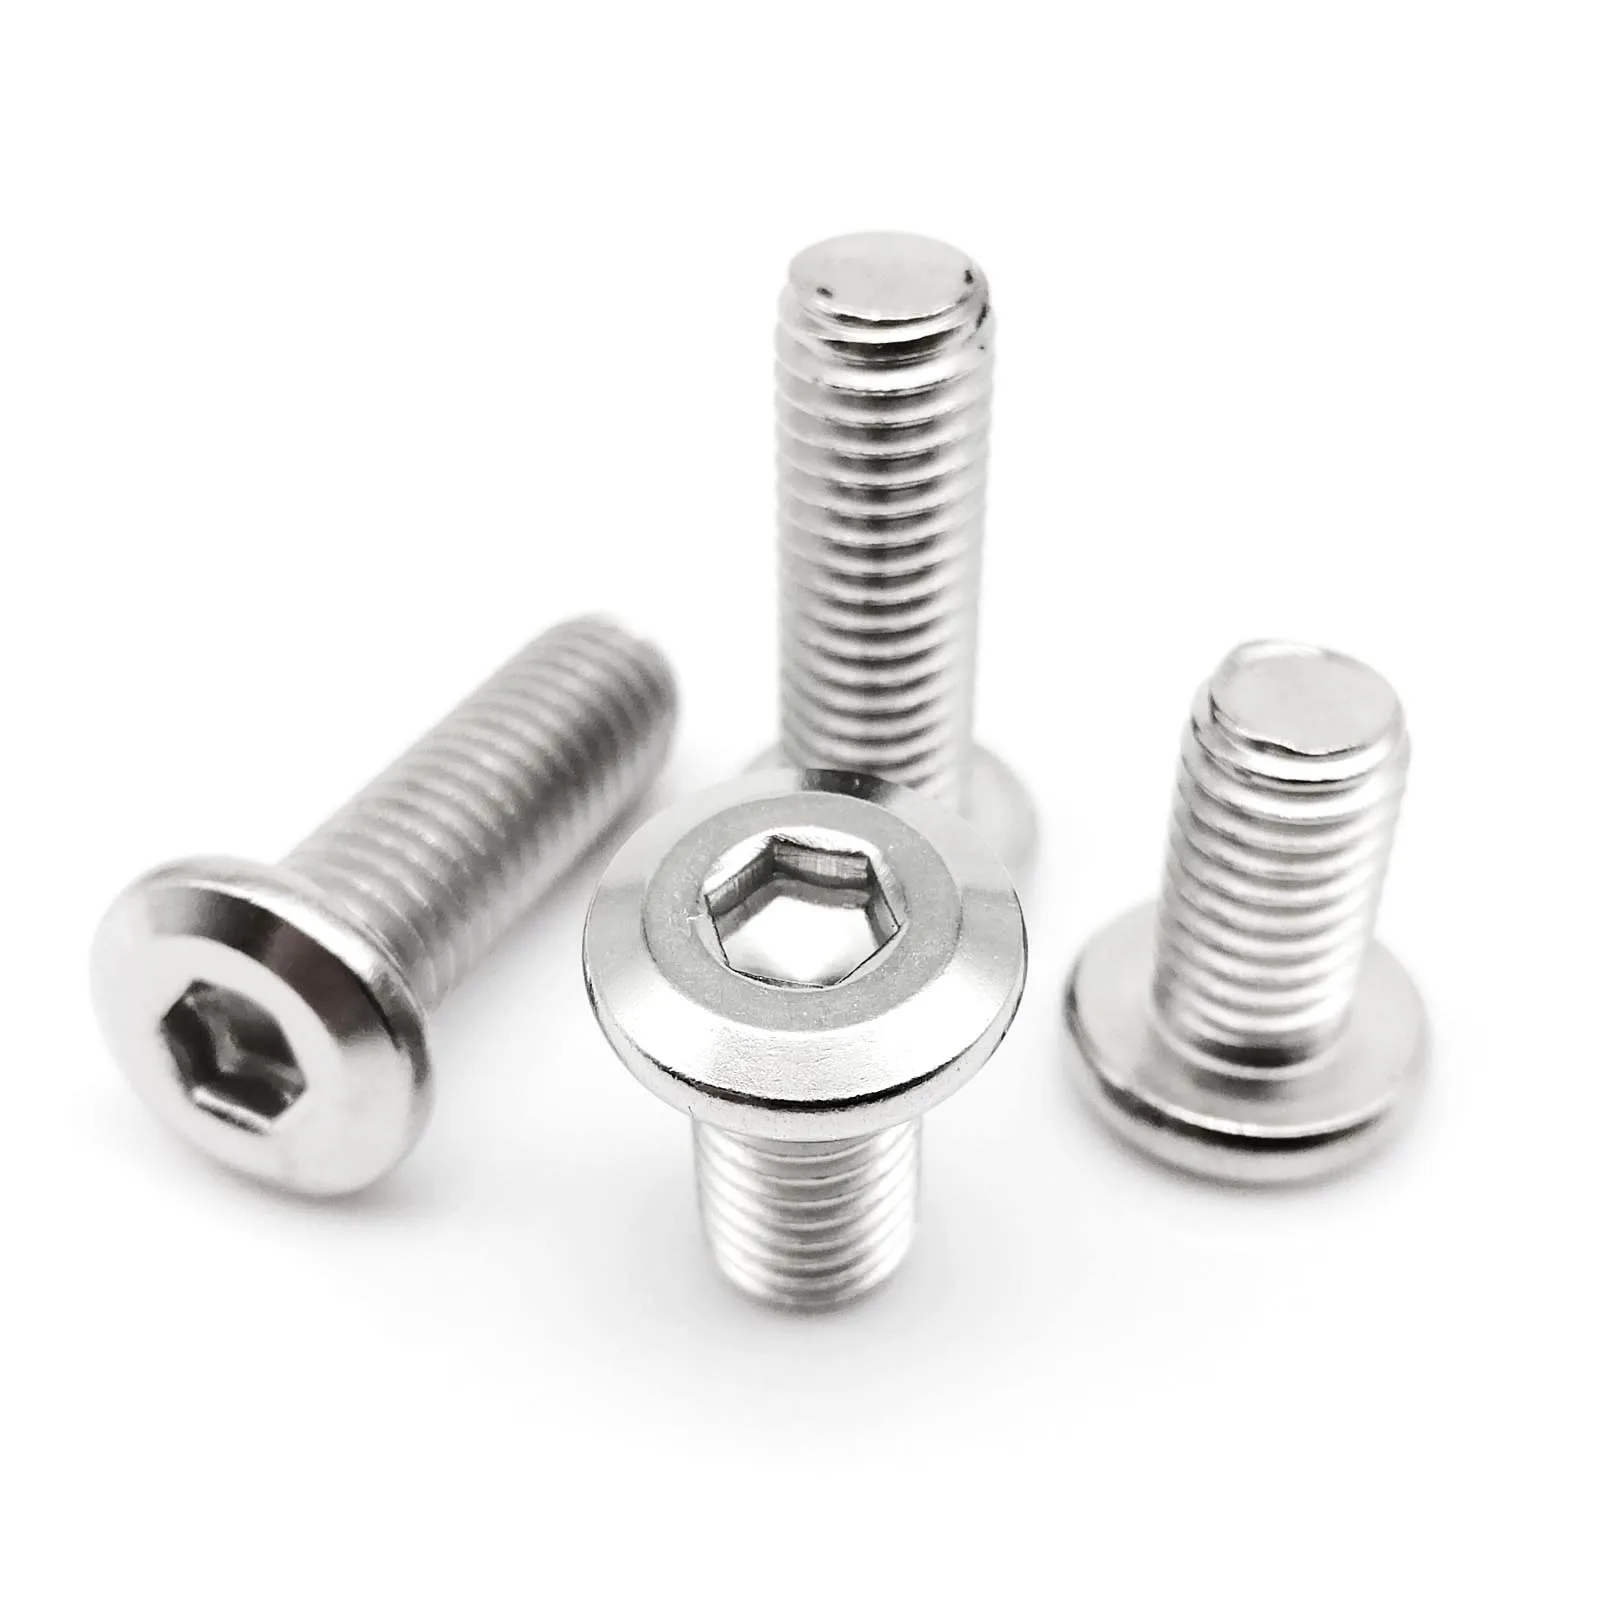 M4-4mm STAINLESS STEEL SOCKET BUTTON SCREW ALLEN DOME BOLT  6MM TO 40MM LONG 